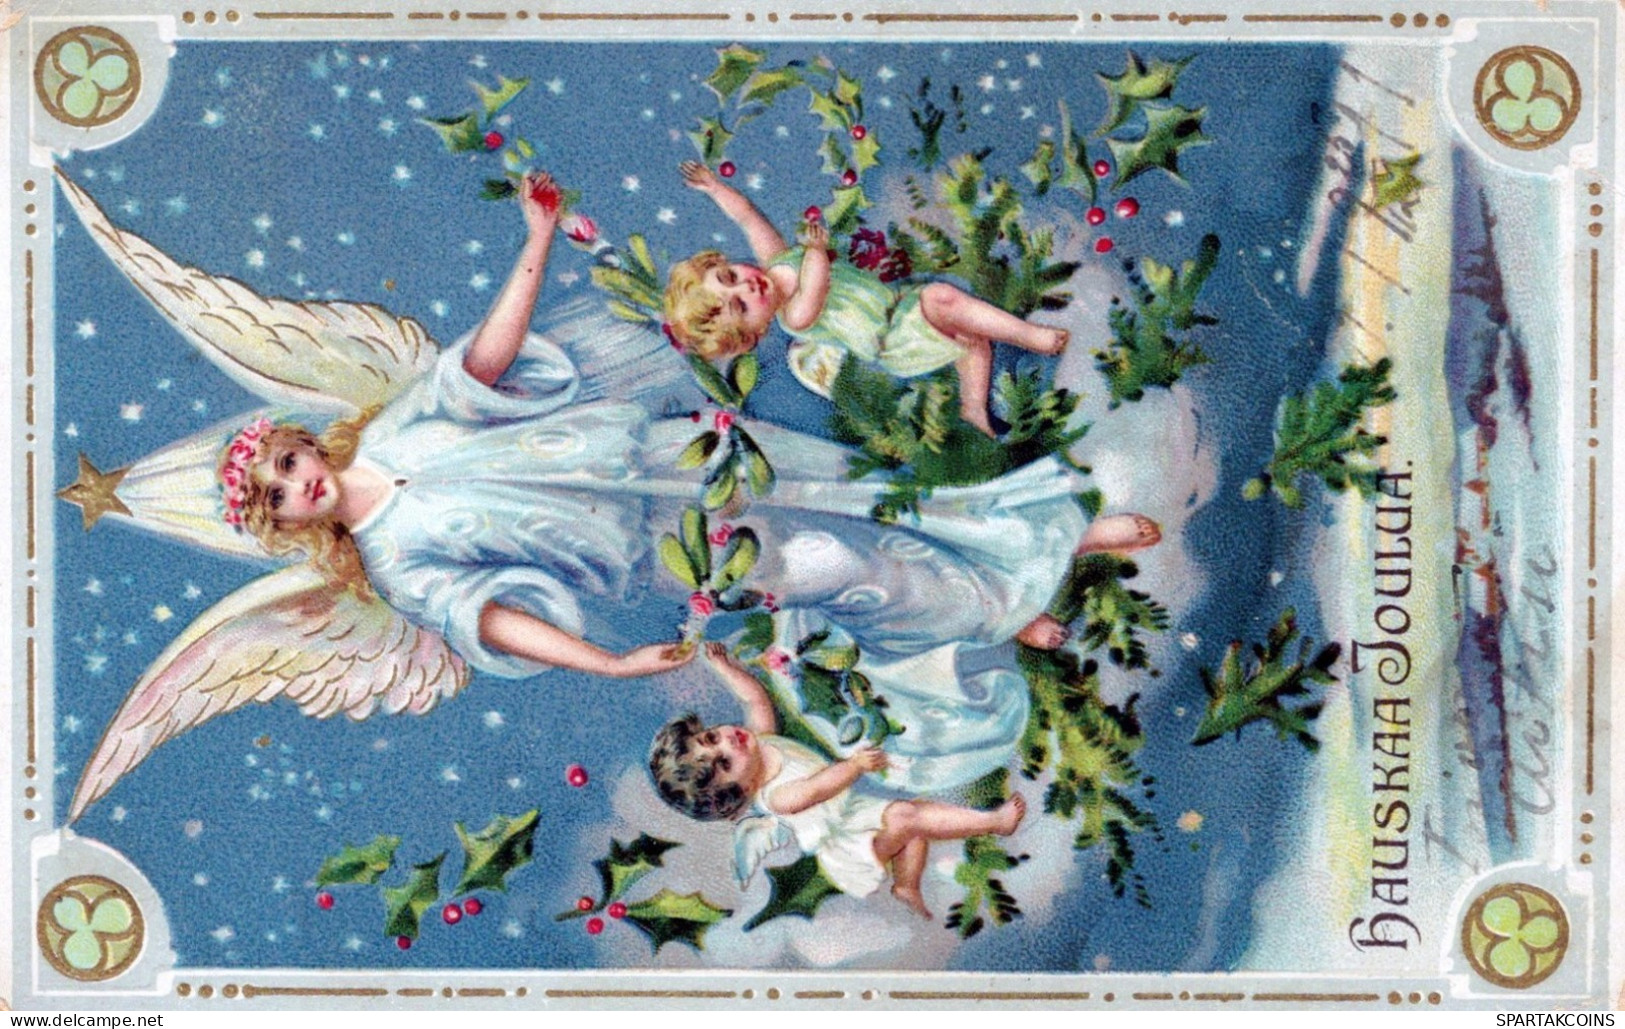 ANGELO Buon Anno Natale Vintage Cartolina CPA #PAG655.IT - Angels